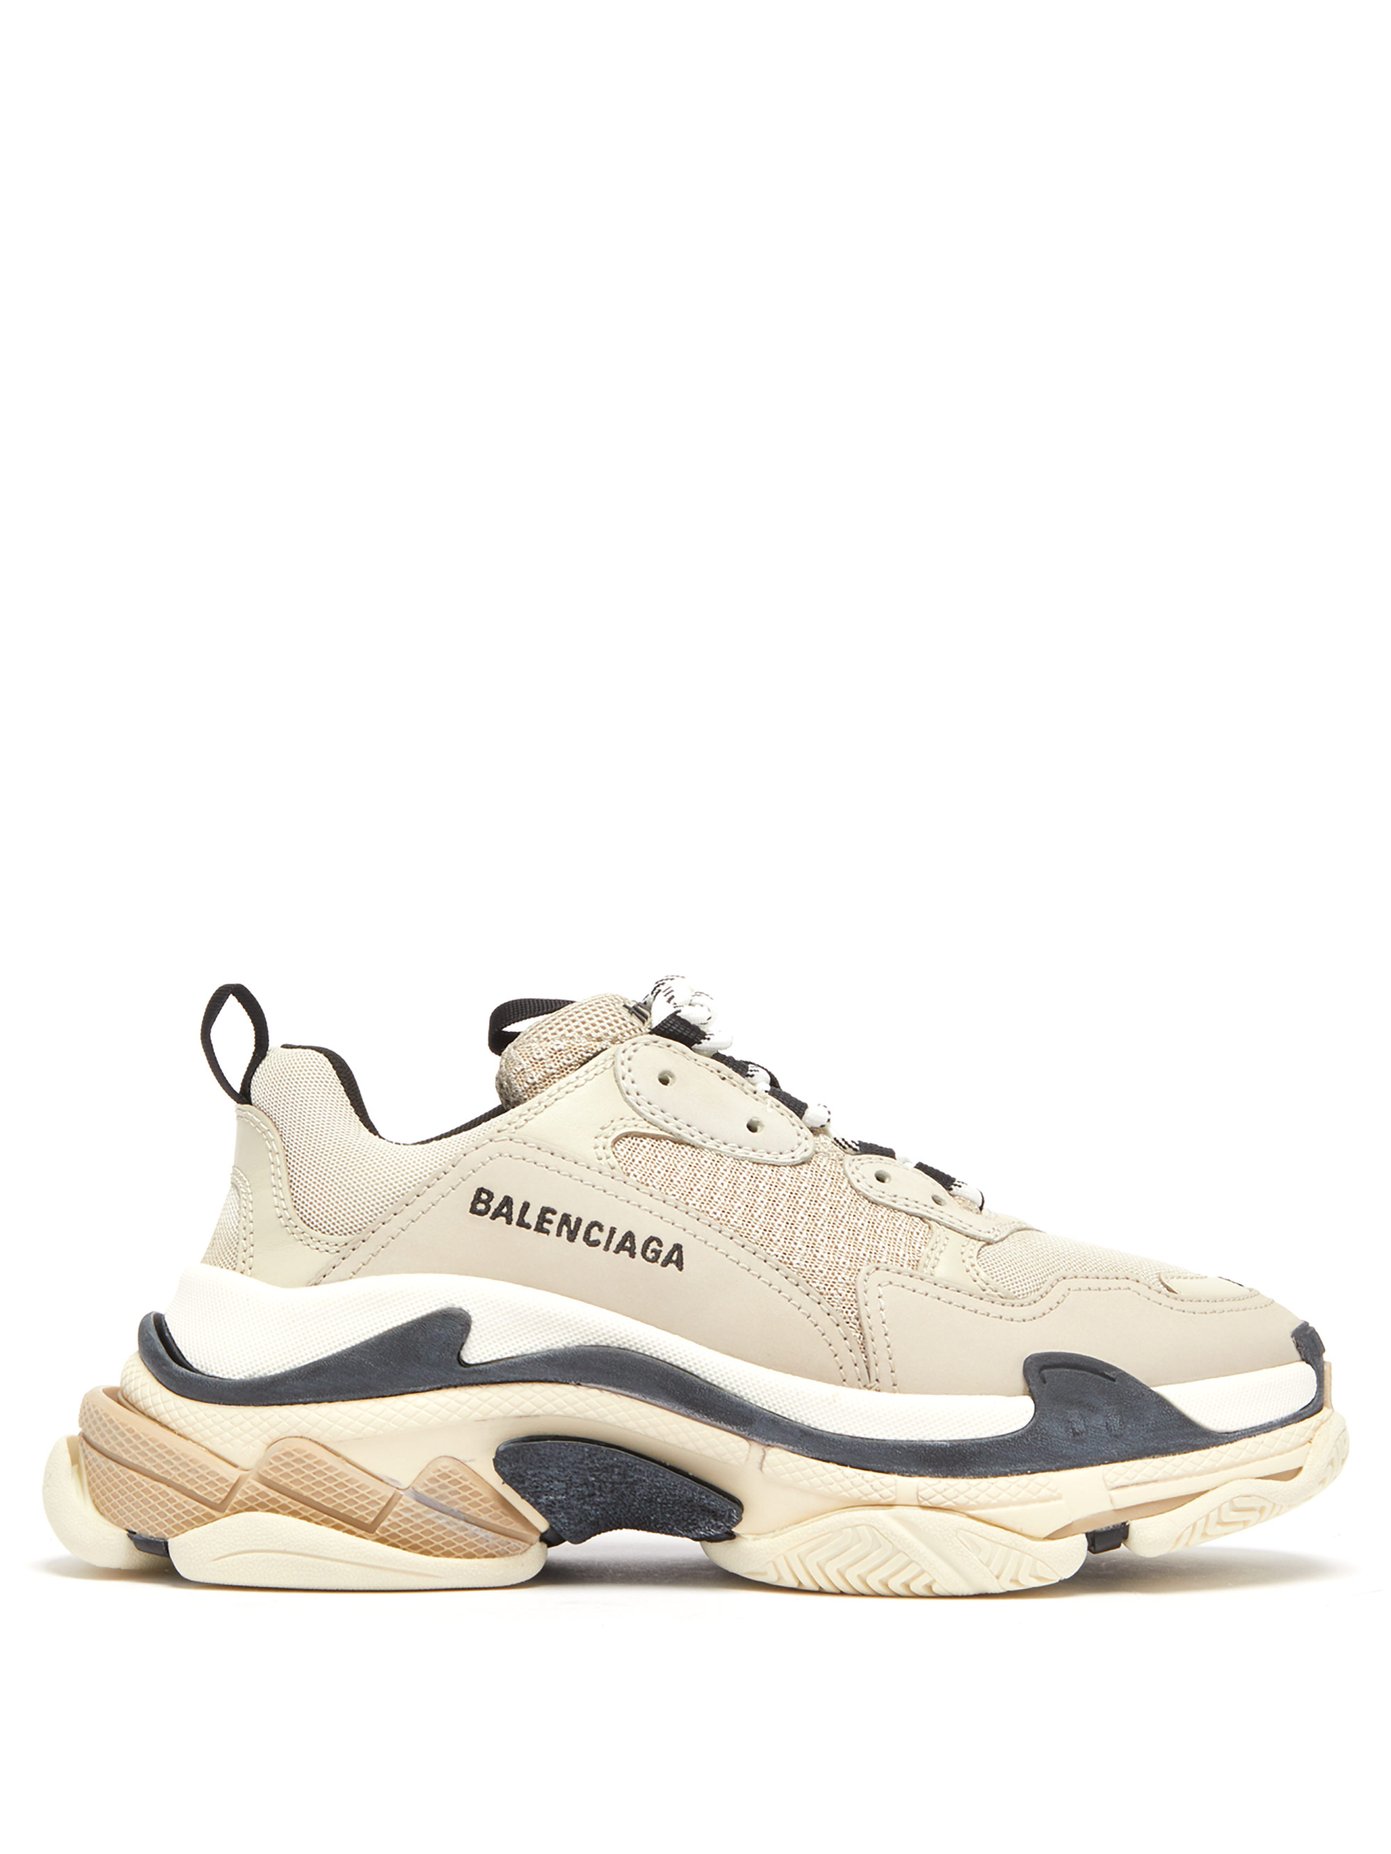 Balenciaga Triple S Pink Women s Sneakers Sandals and